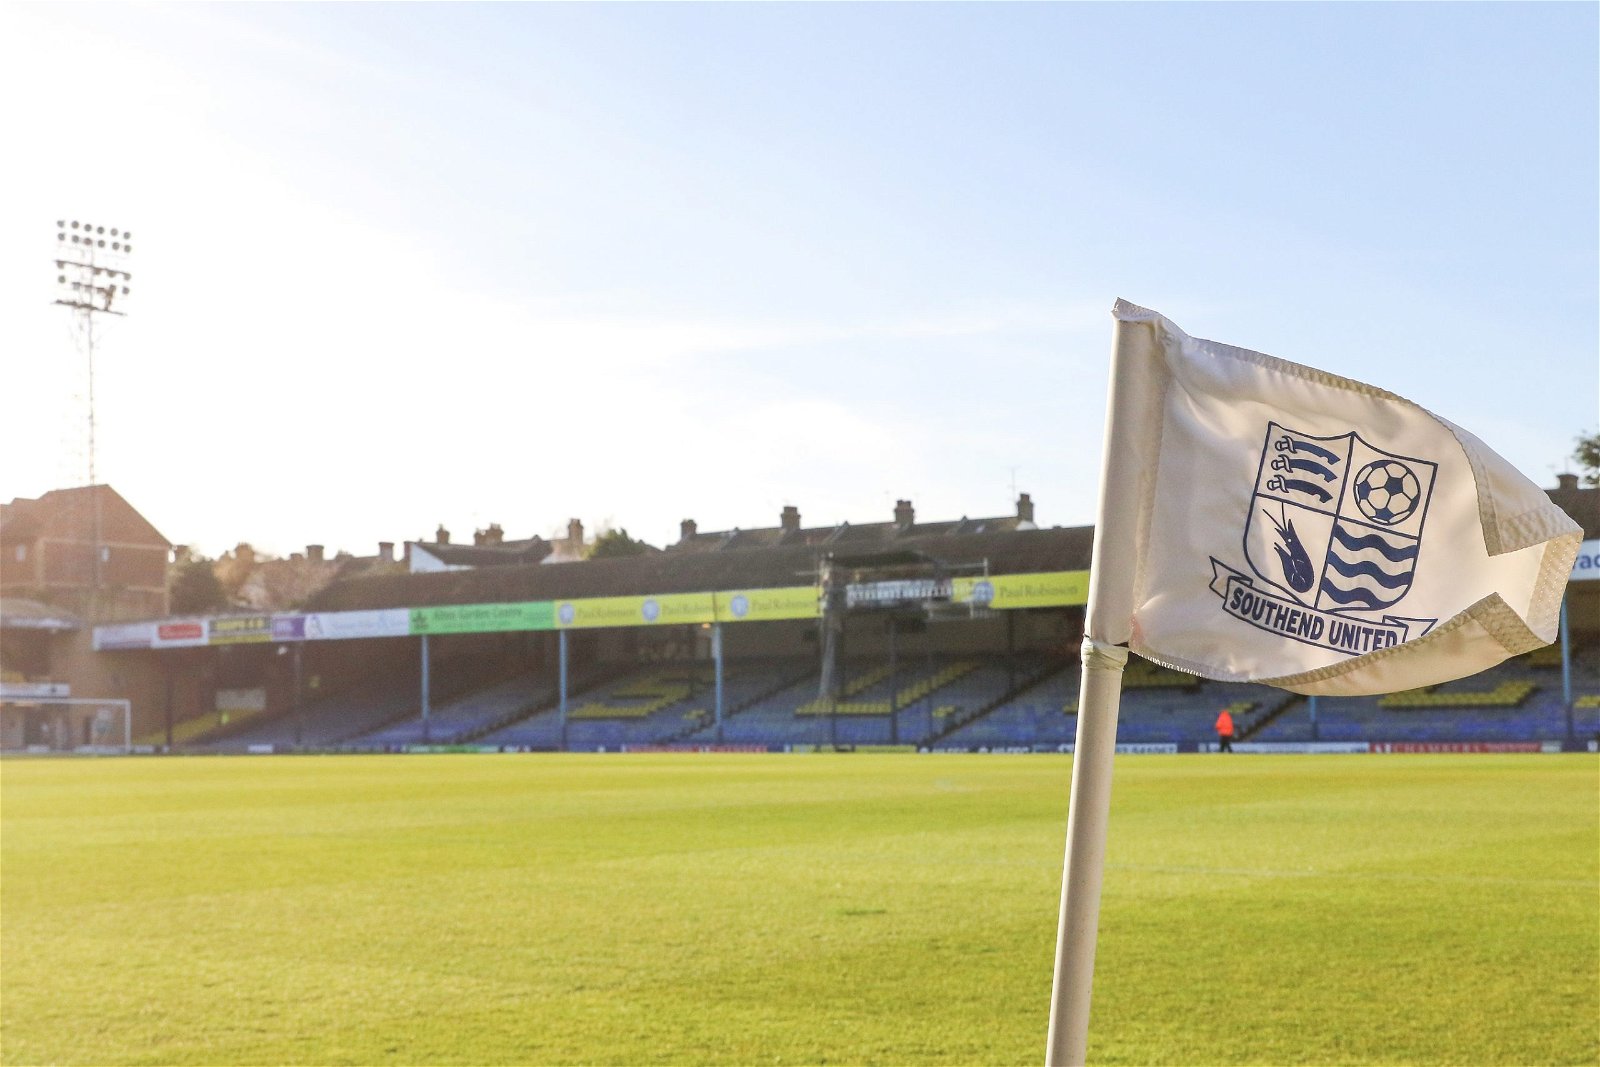 Southend United, Five potential candidates to replace Chris Powell at Southend United